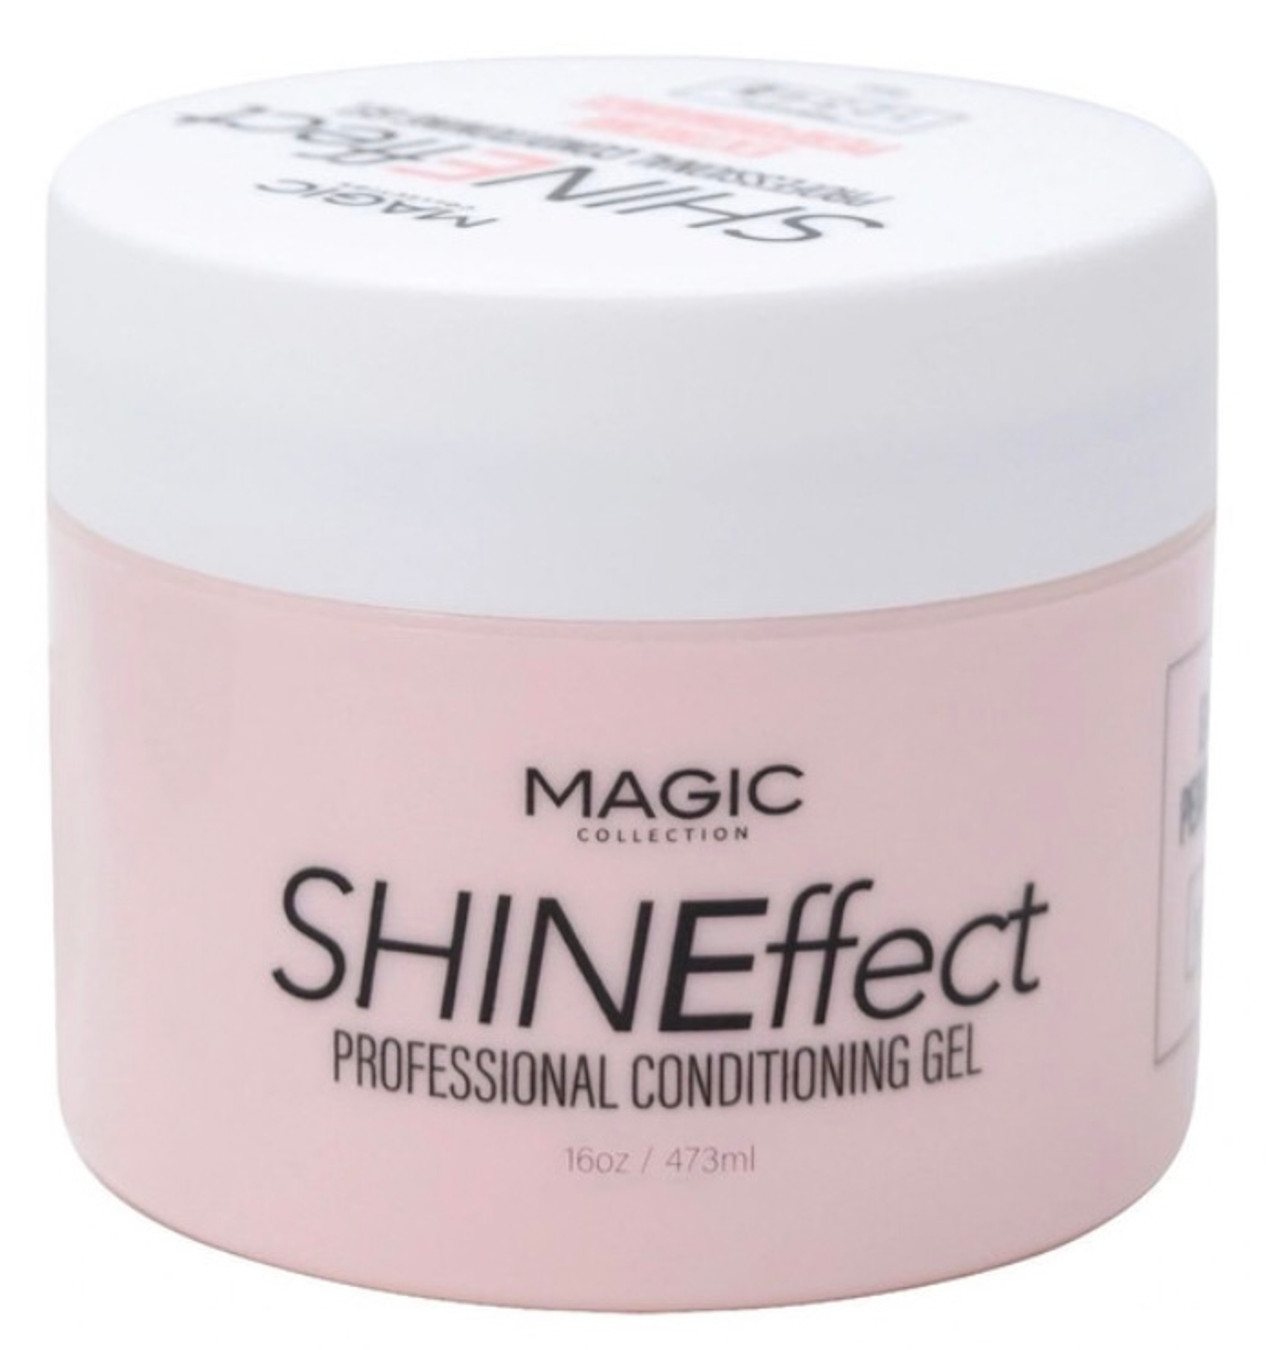 MAGIC COLLECTION Shineffect Professional Conditioning Gel [Extreme Performance]